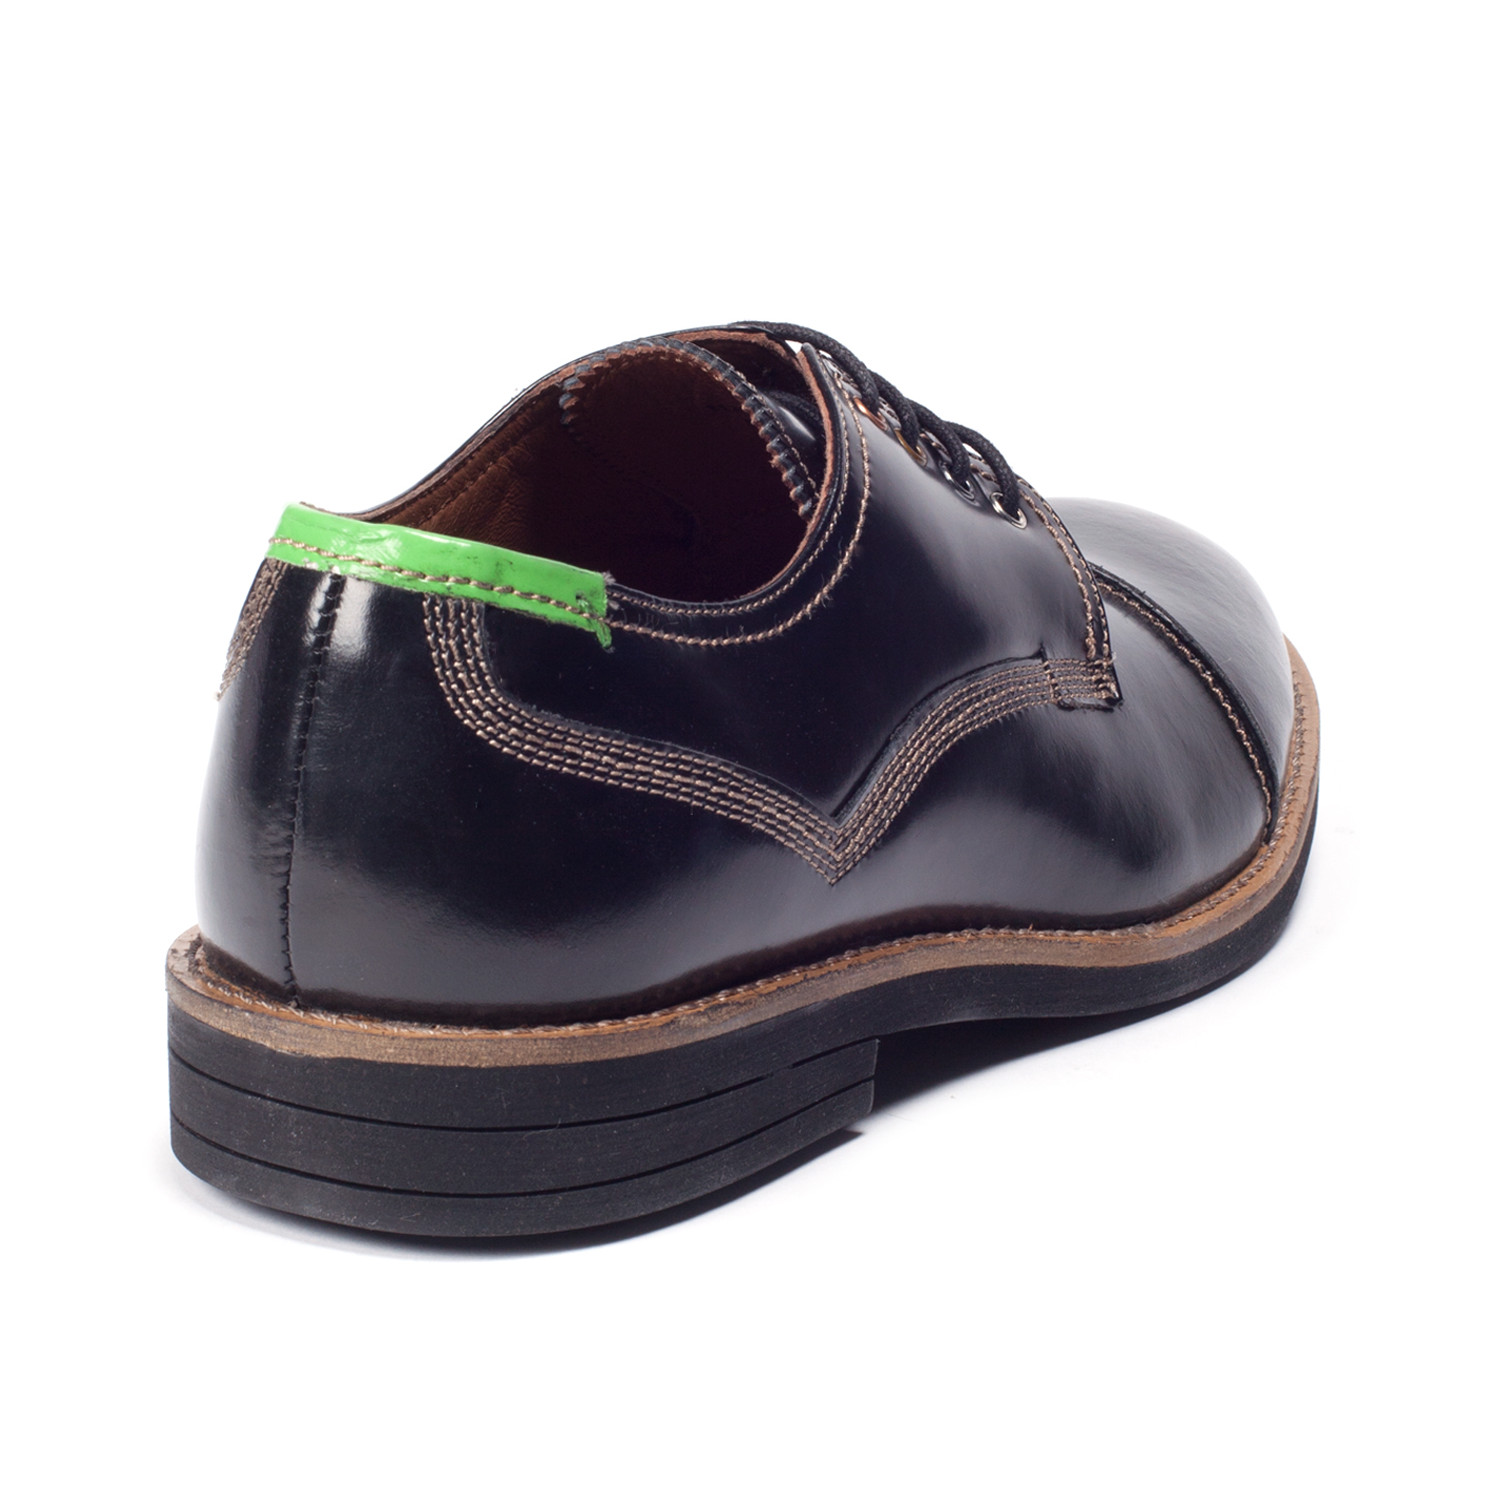 Parlor Game Derby // Black (US: 8) - Testosterone Shoes ...